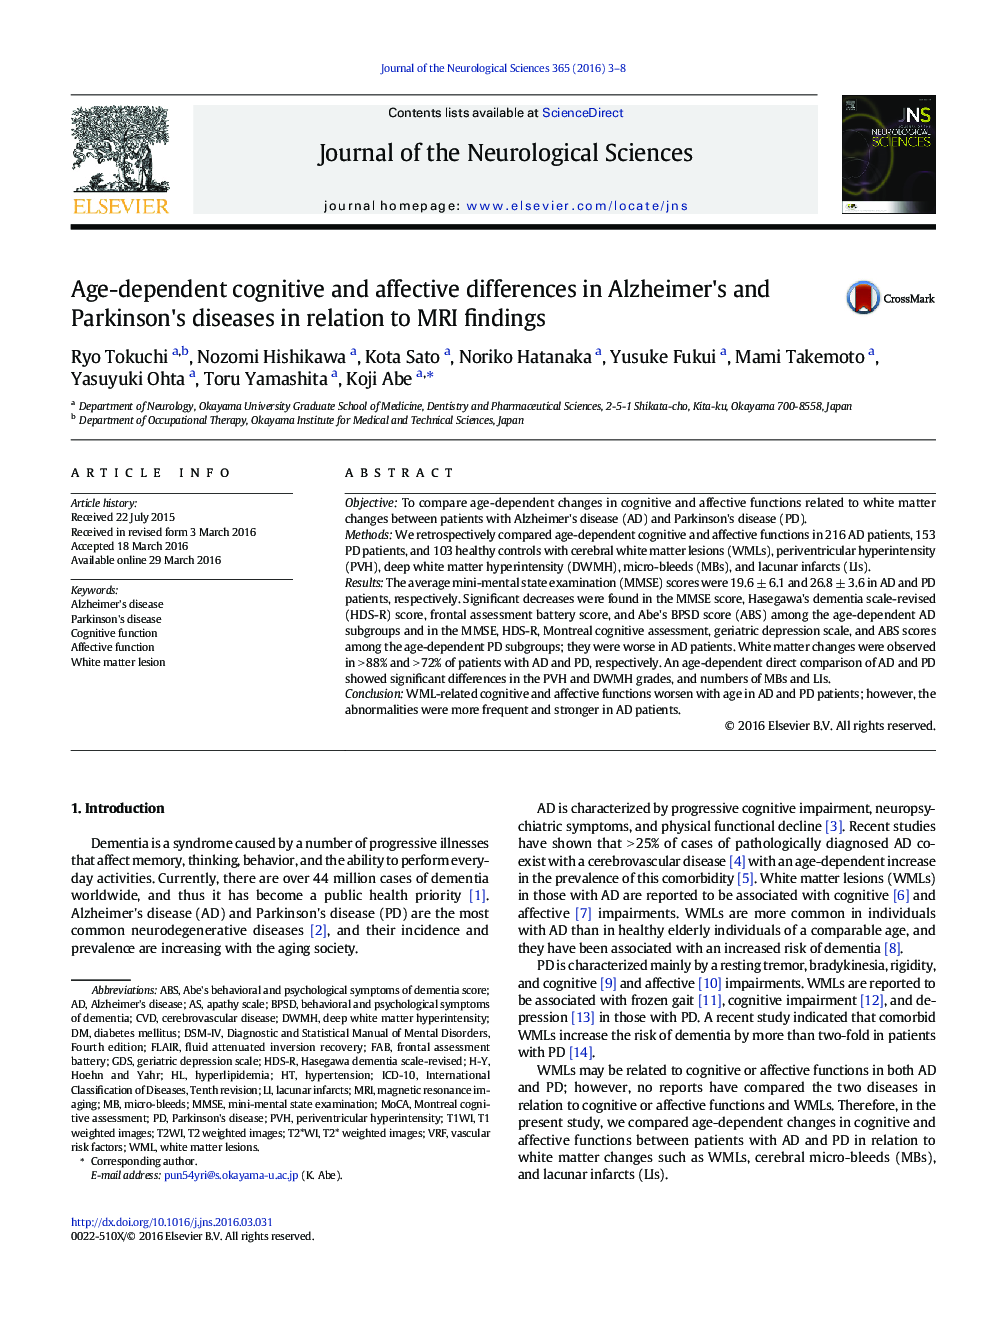 Age-dependent cognitive and affective differences in Alzheimer's and Parkinson's diseases in relation to MRI findings